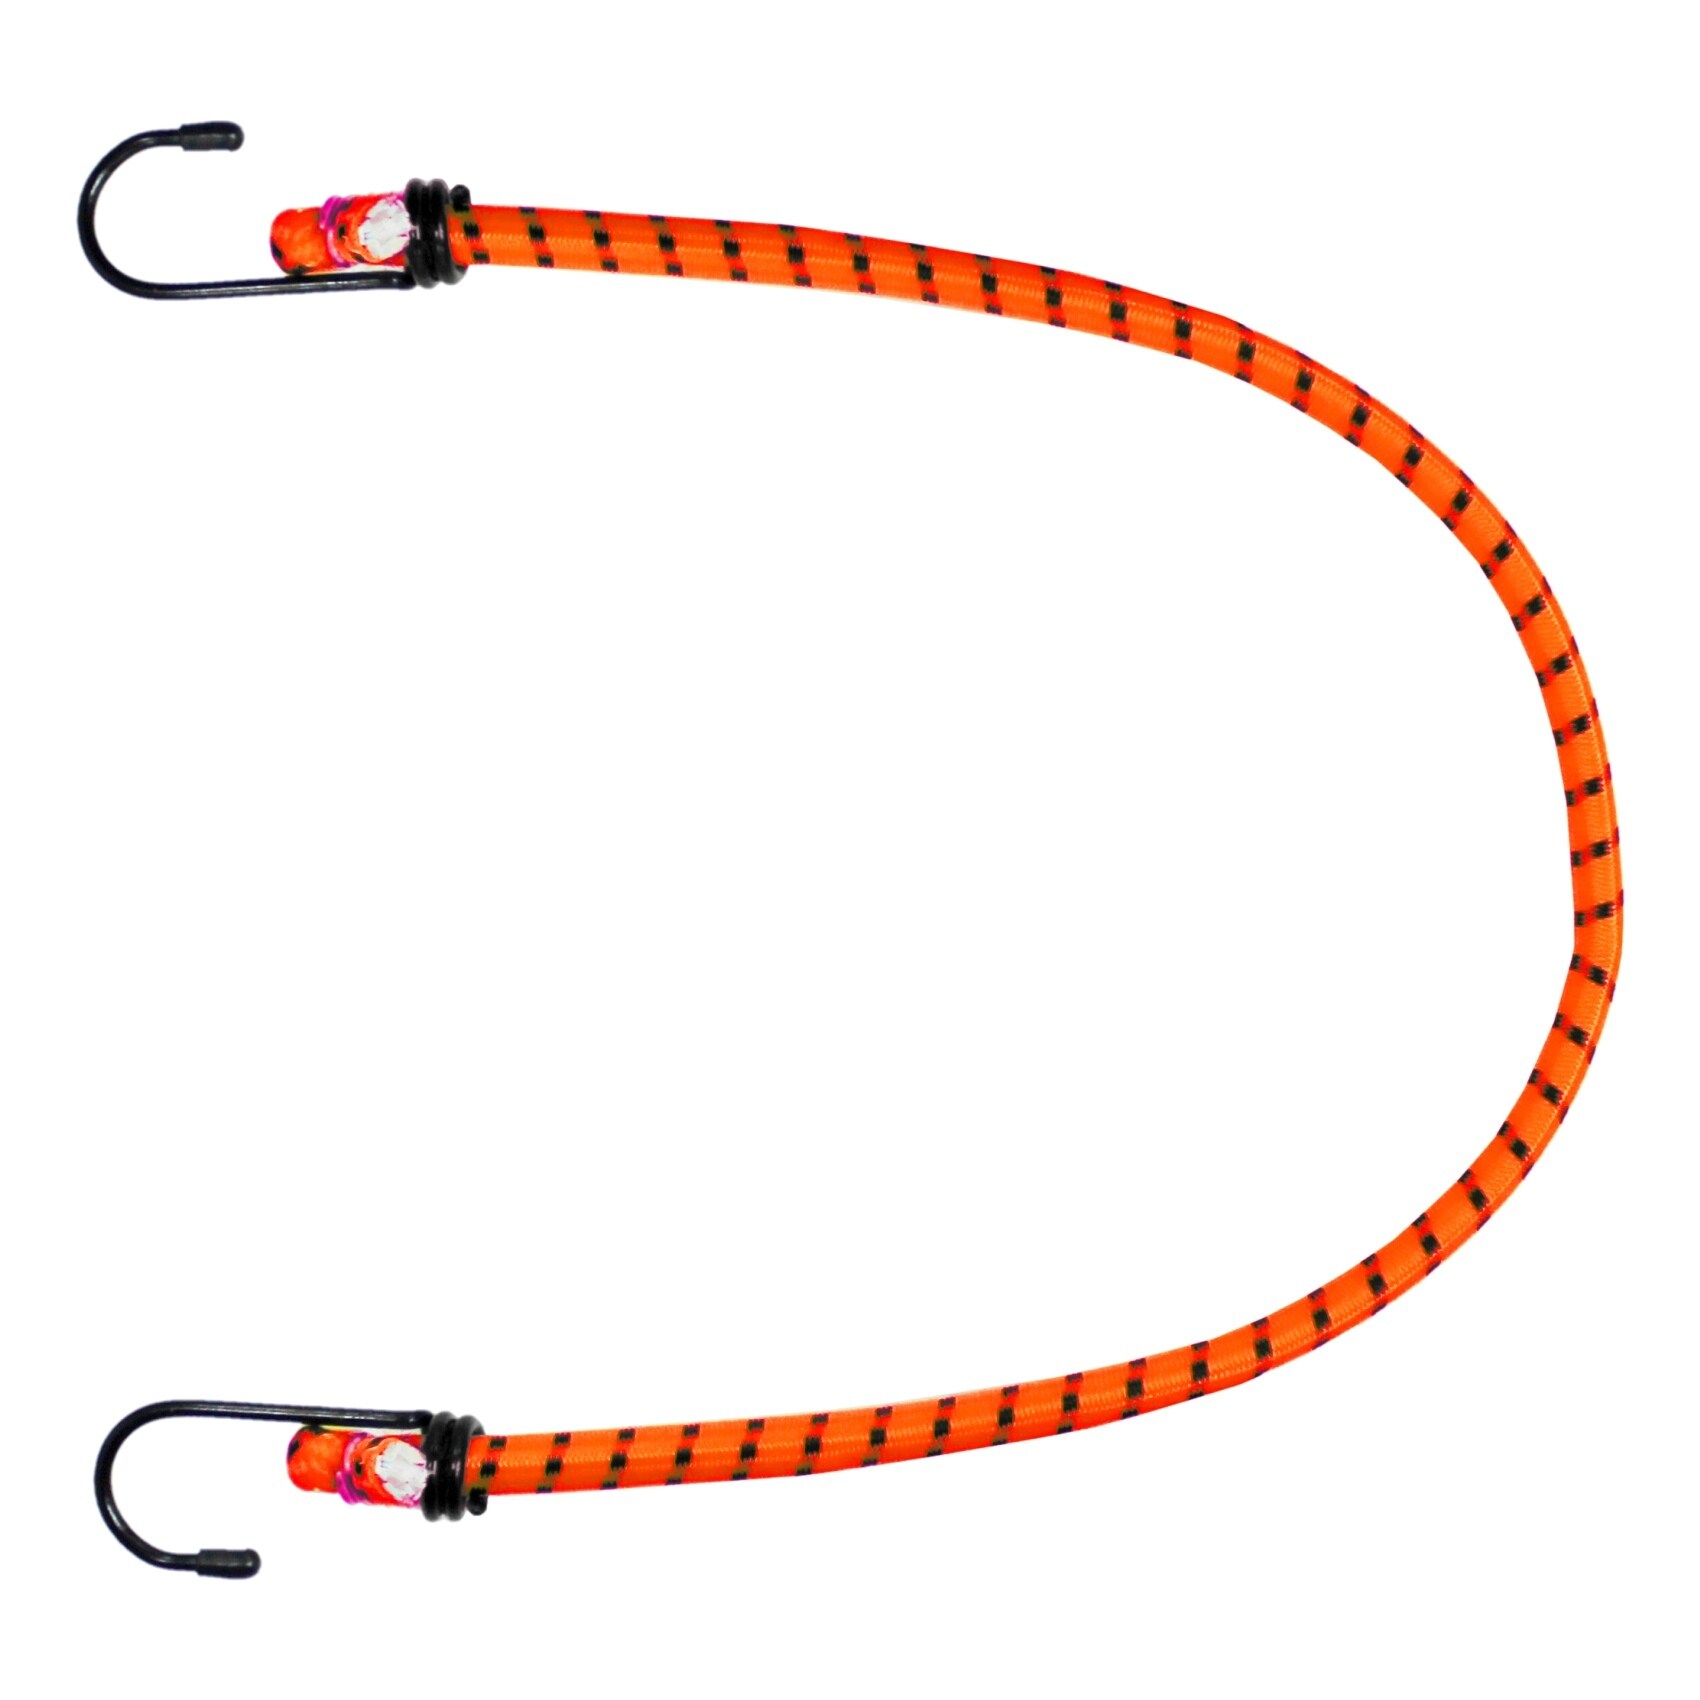 Buy Tow Rope Online - Shop on Carrefour UAE